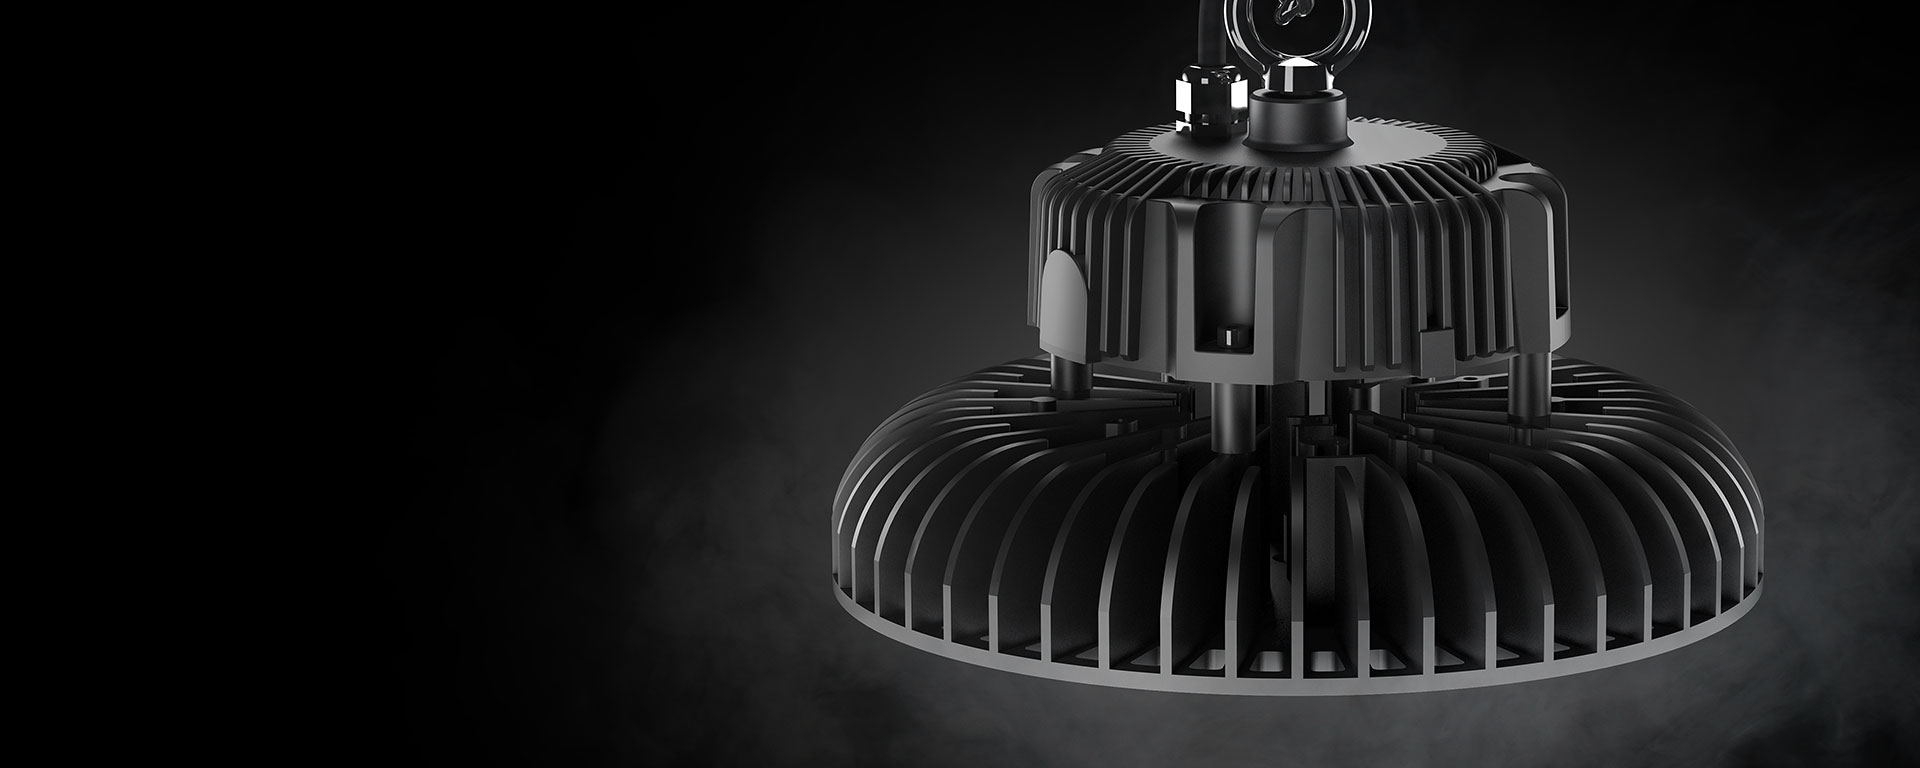 The AZIZ LIGHT™ is an extremely robust industrial LED high bay luminaire that has superior performance due to its tempered glass lens and cold-forged pure aluminium body. Perfect for the processing plant and warehouse applications.